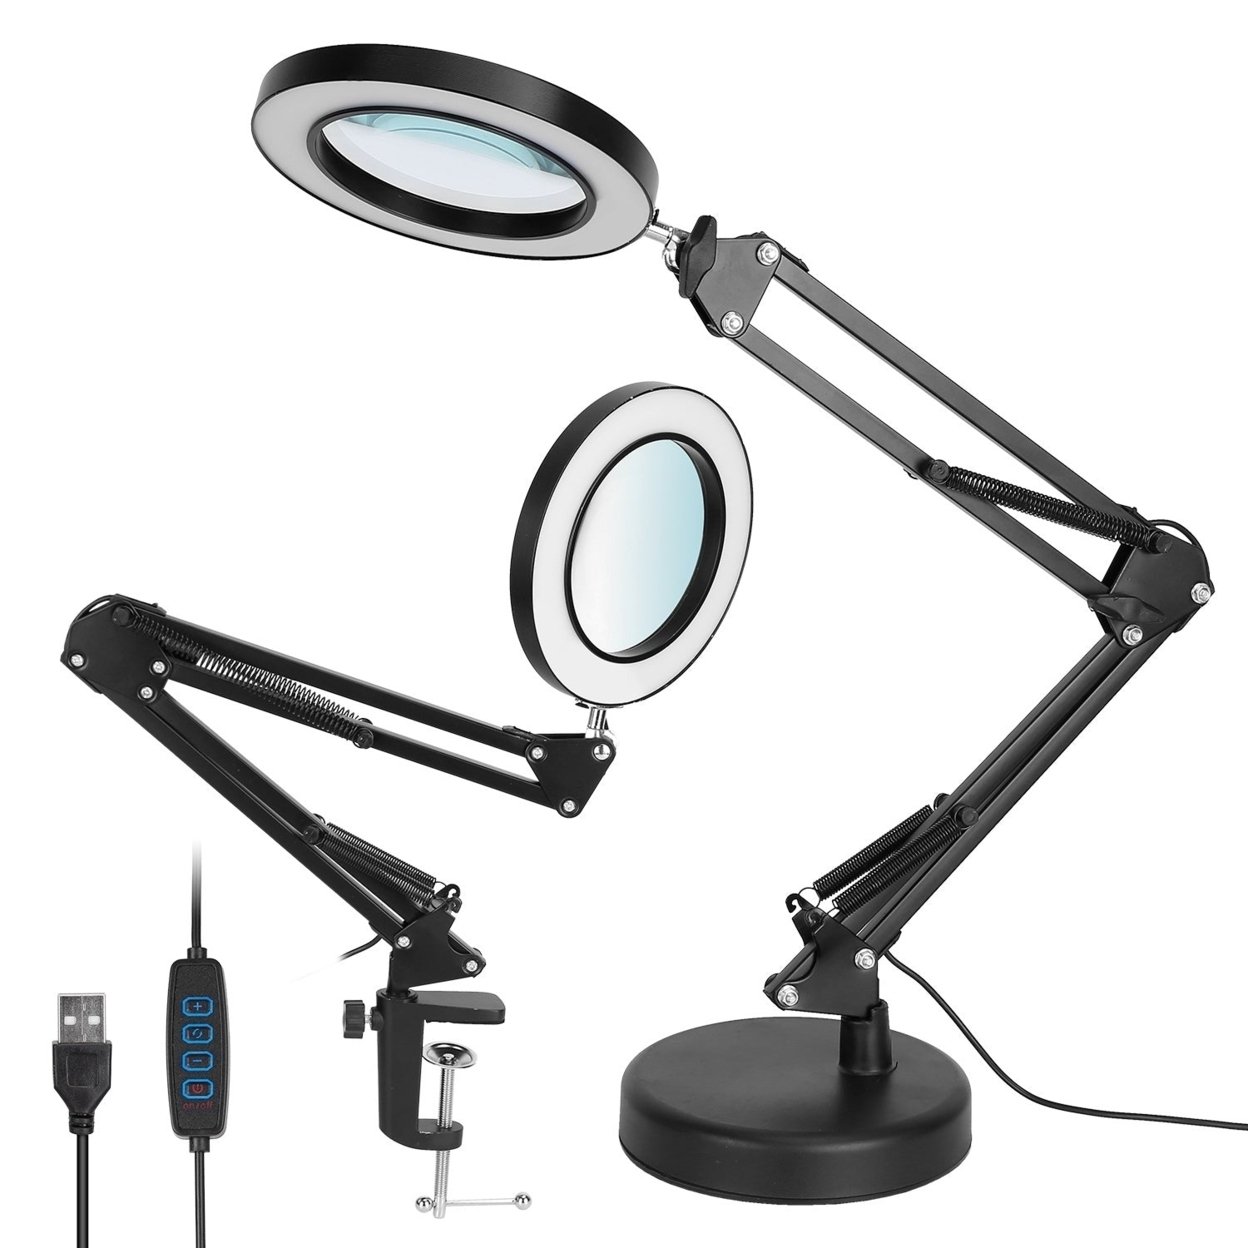 Dsermall LED Magnifier Desk Lamp 8x Magnifying Glass with Light Swing Arm Desk Table Light USB Reading Lamp